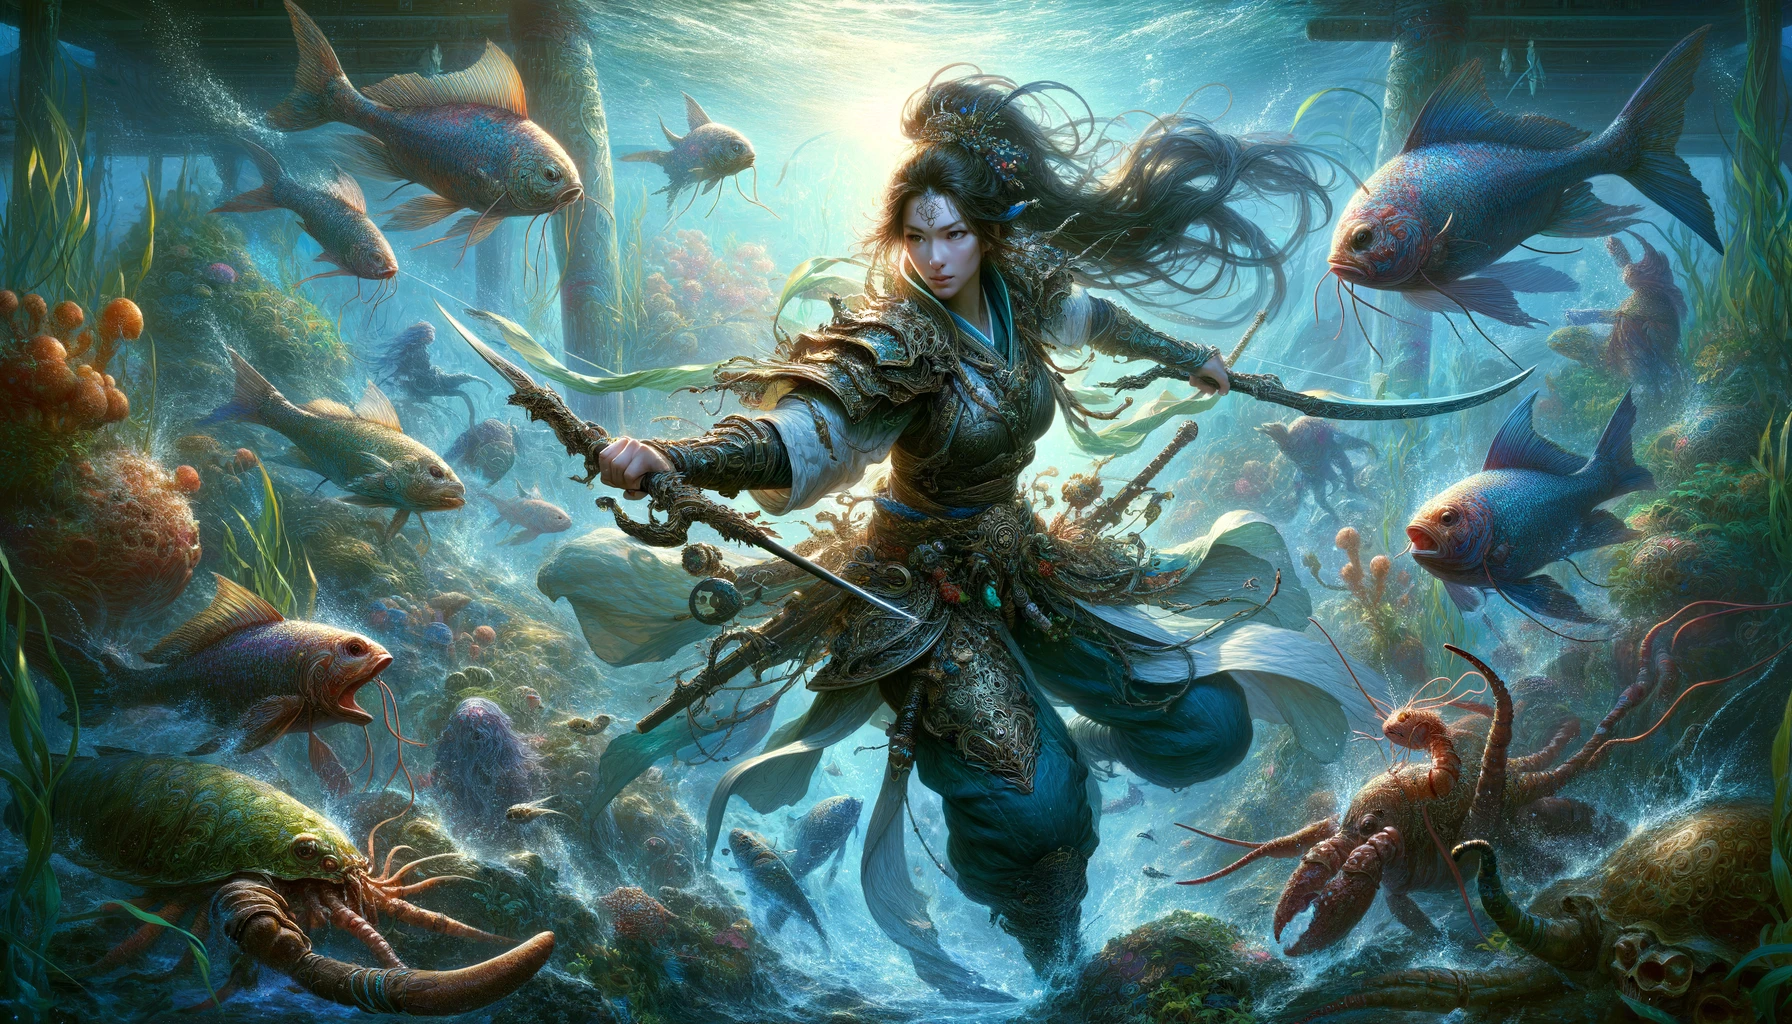 Namora is portrayed in full combat in Marvel Snap's underwater world, dynamically interacting with the marine environment, highlighted by rich colors and detailed textures.